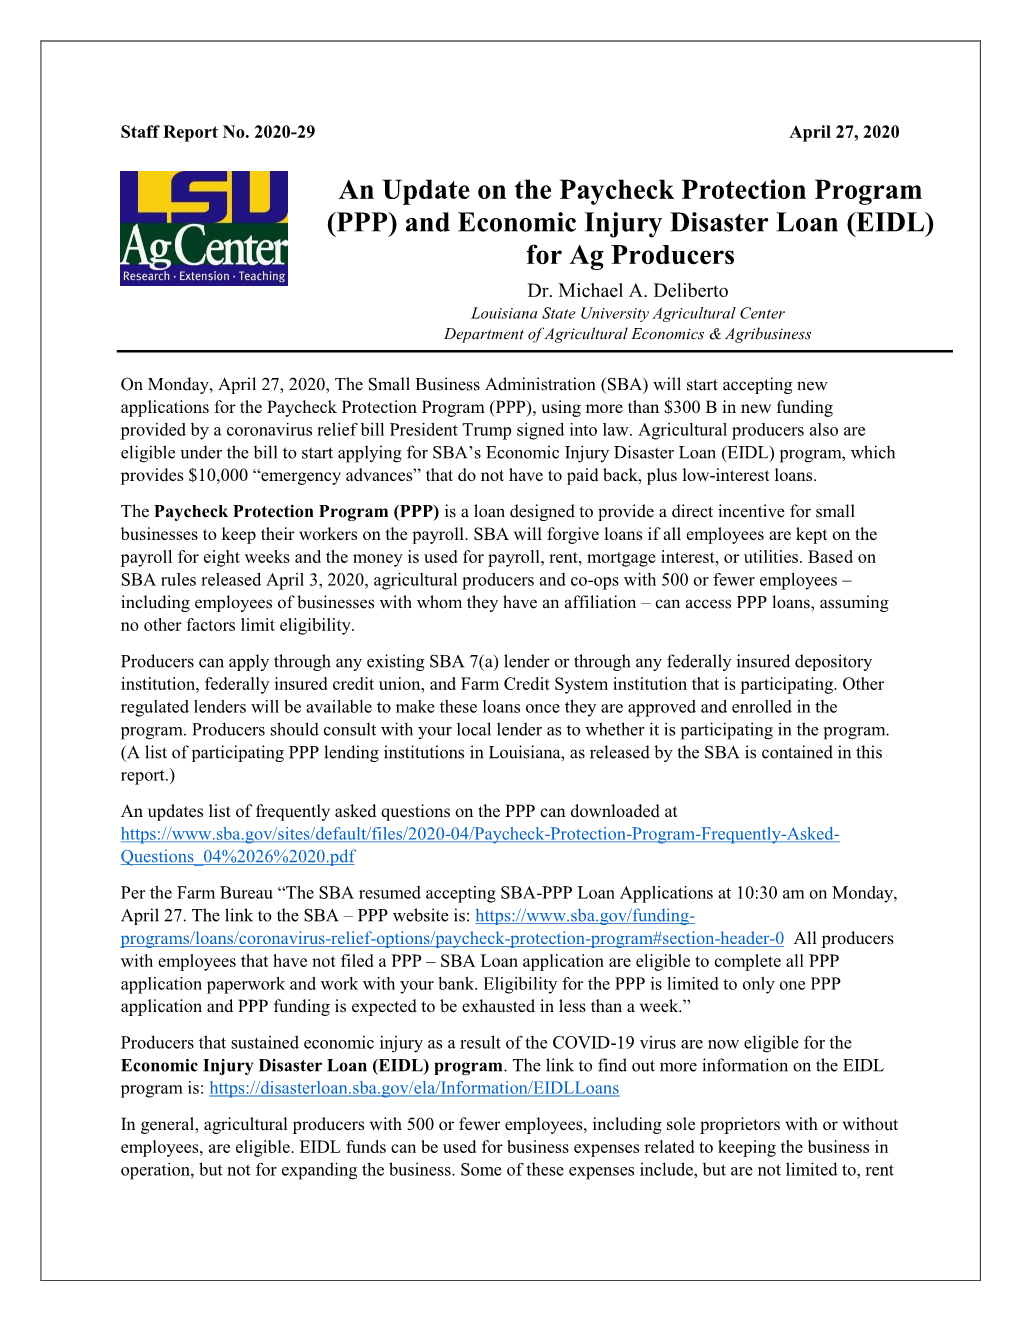 An Update on the Paycheck Protection Program (PPP) and Economic Injury Disaster Loan (EIDL)